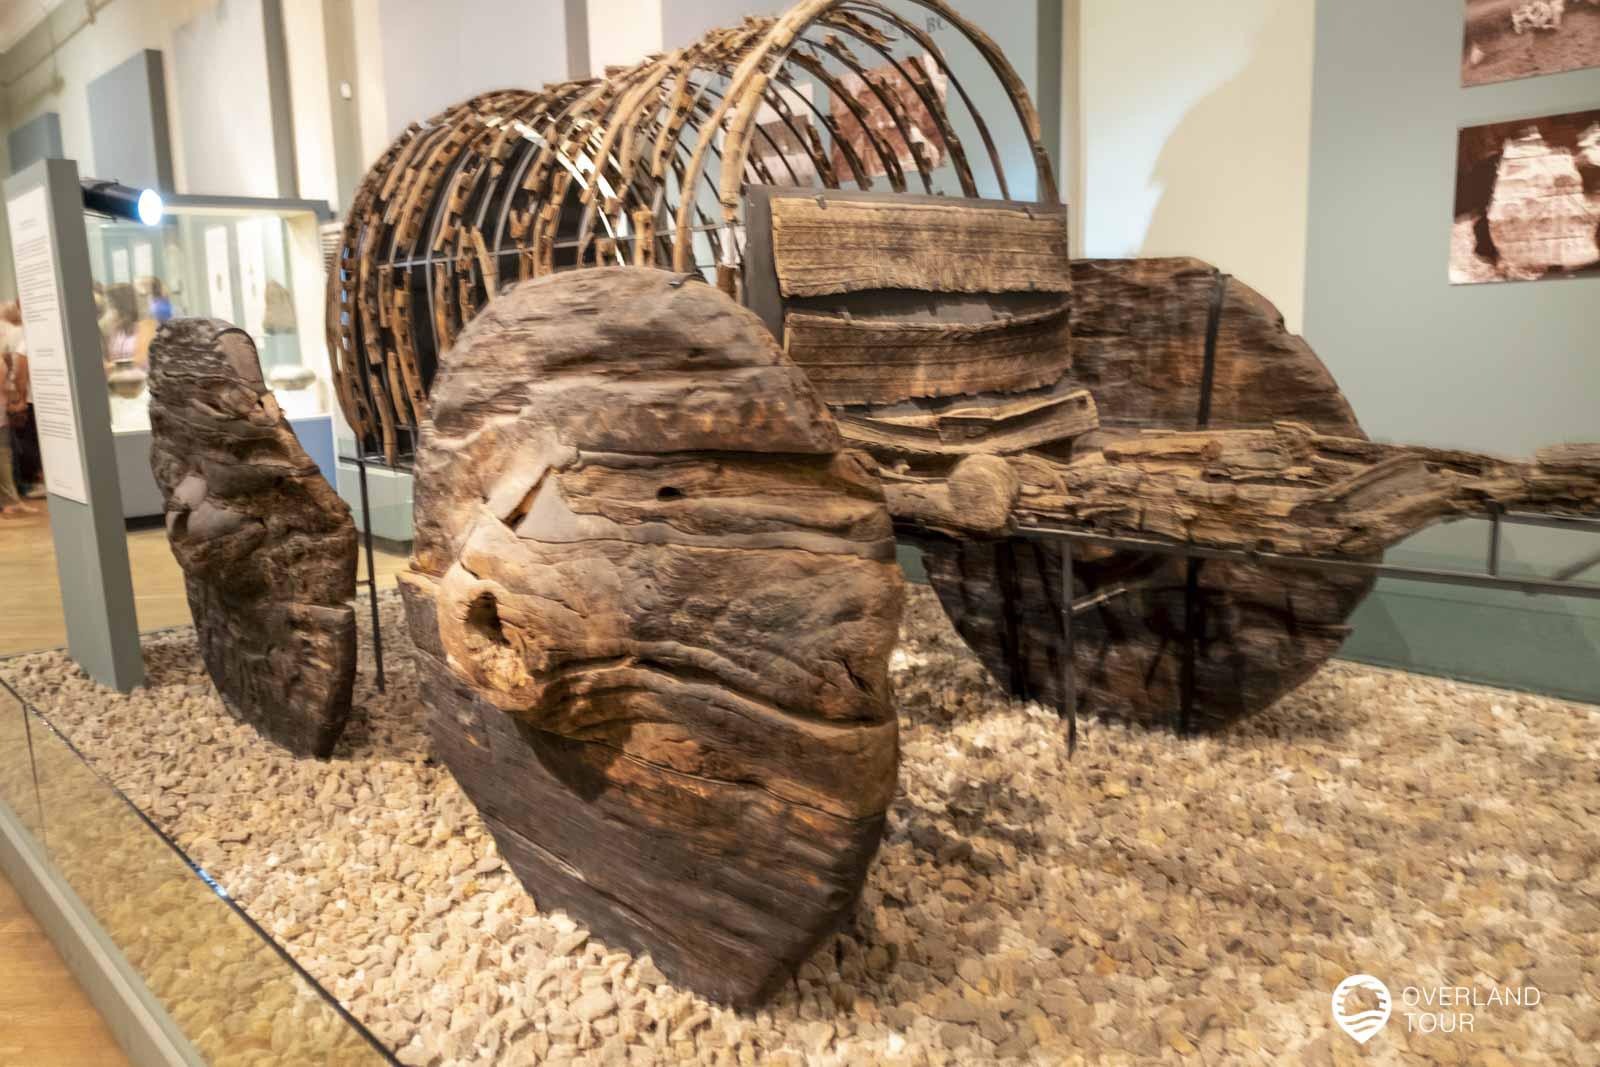 This incredibly preserved 4,000 year old wagon made of just oakwood, unearthed in the Lchashen village near Lake Sevan, Armenia. It is among oldest wagons in the world.jpg